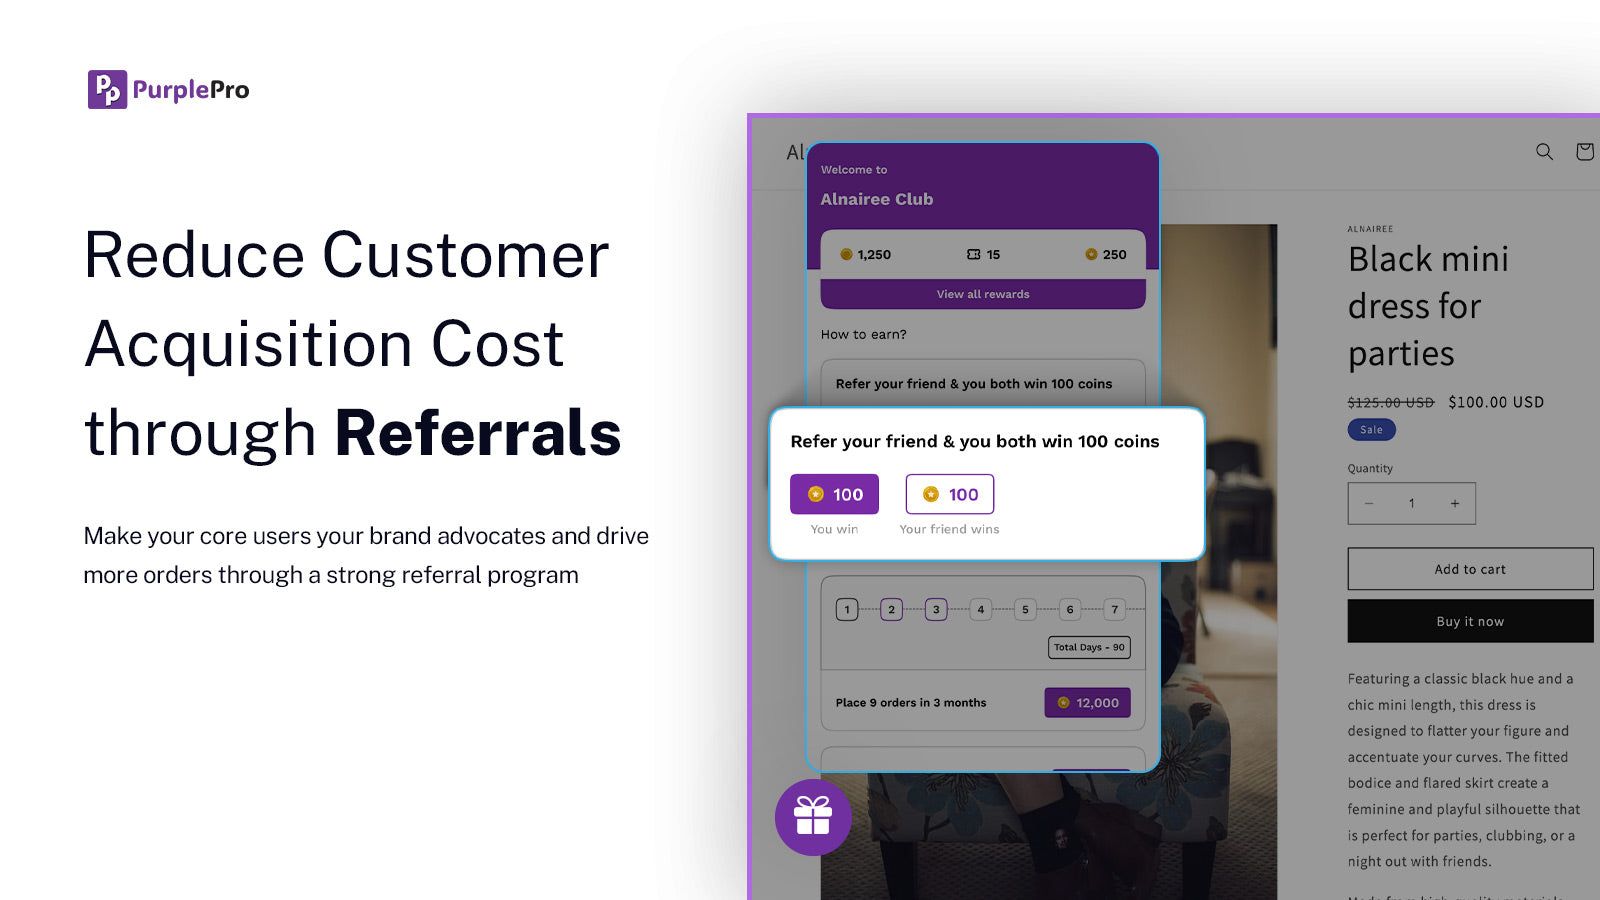 Get more customers through a strong referral program